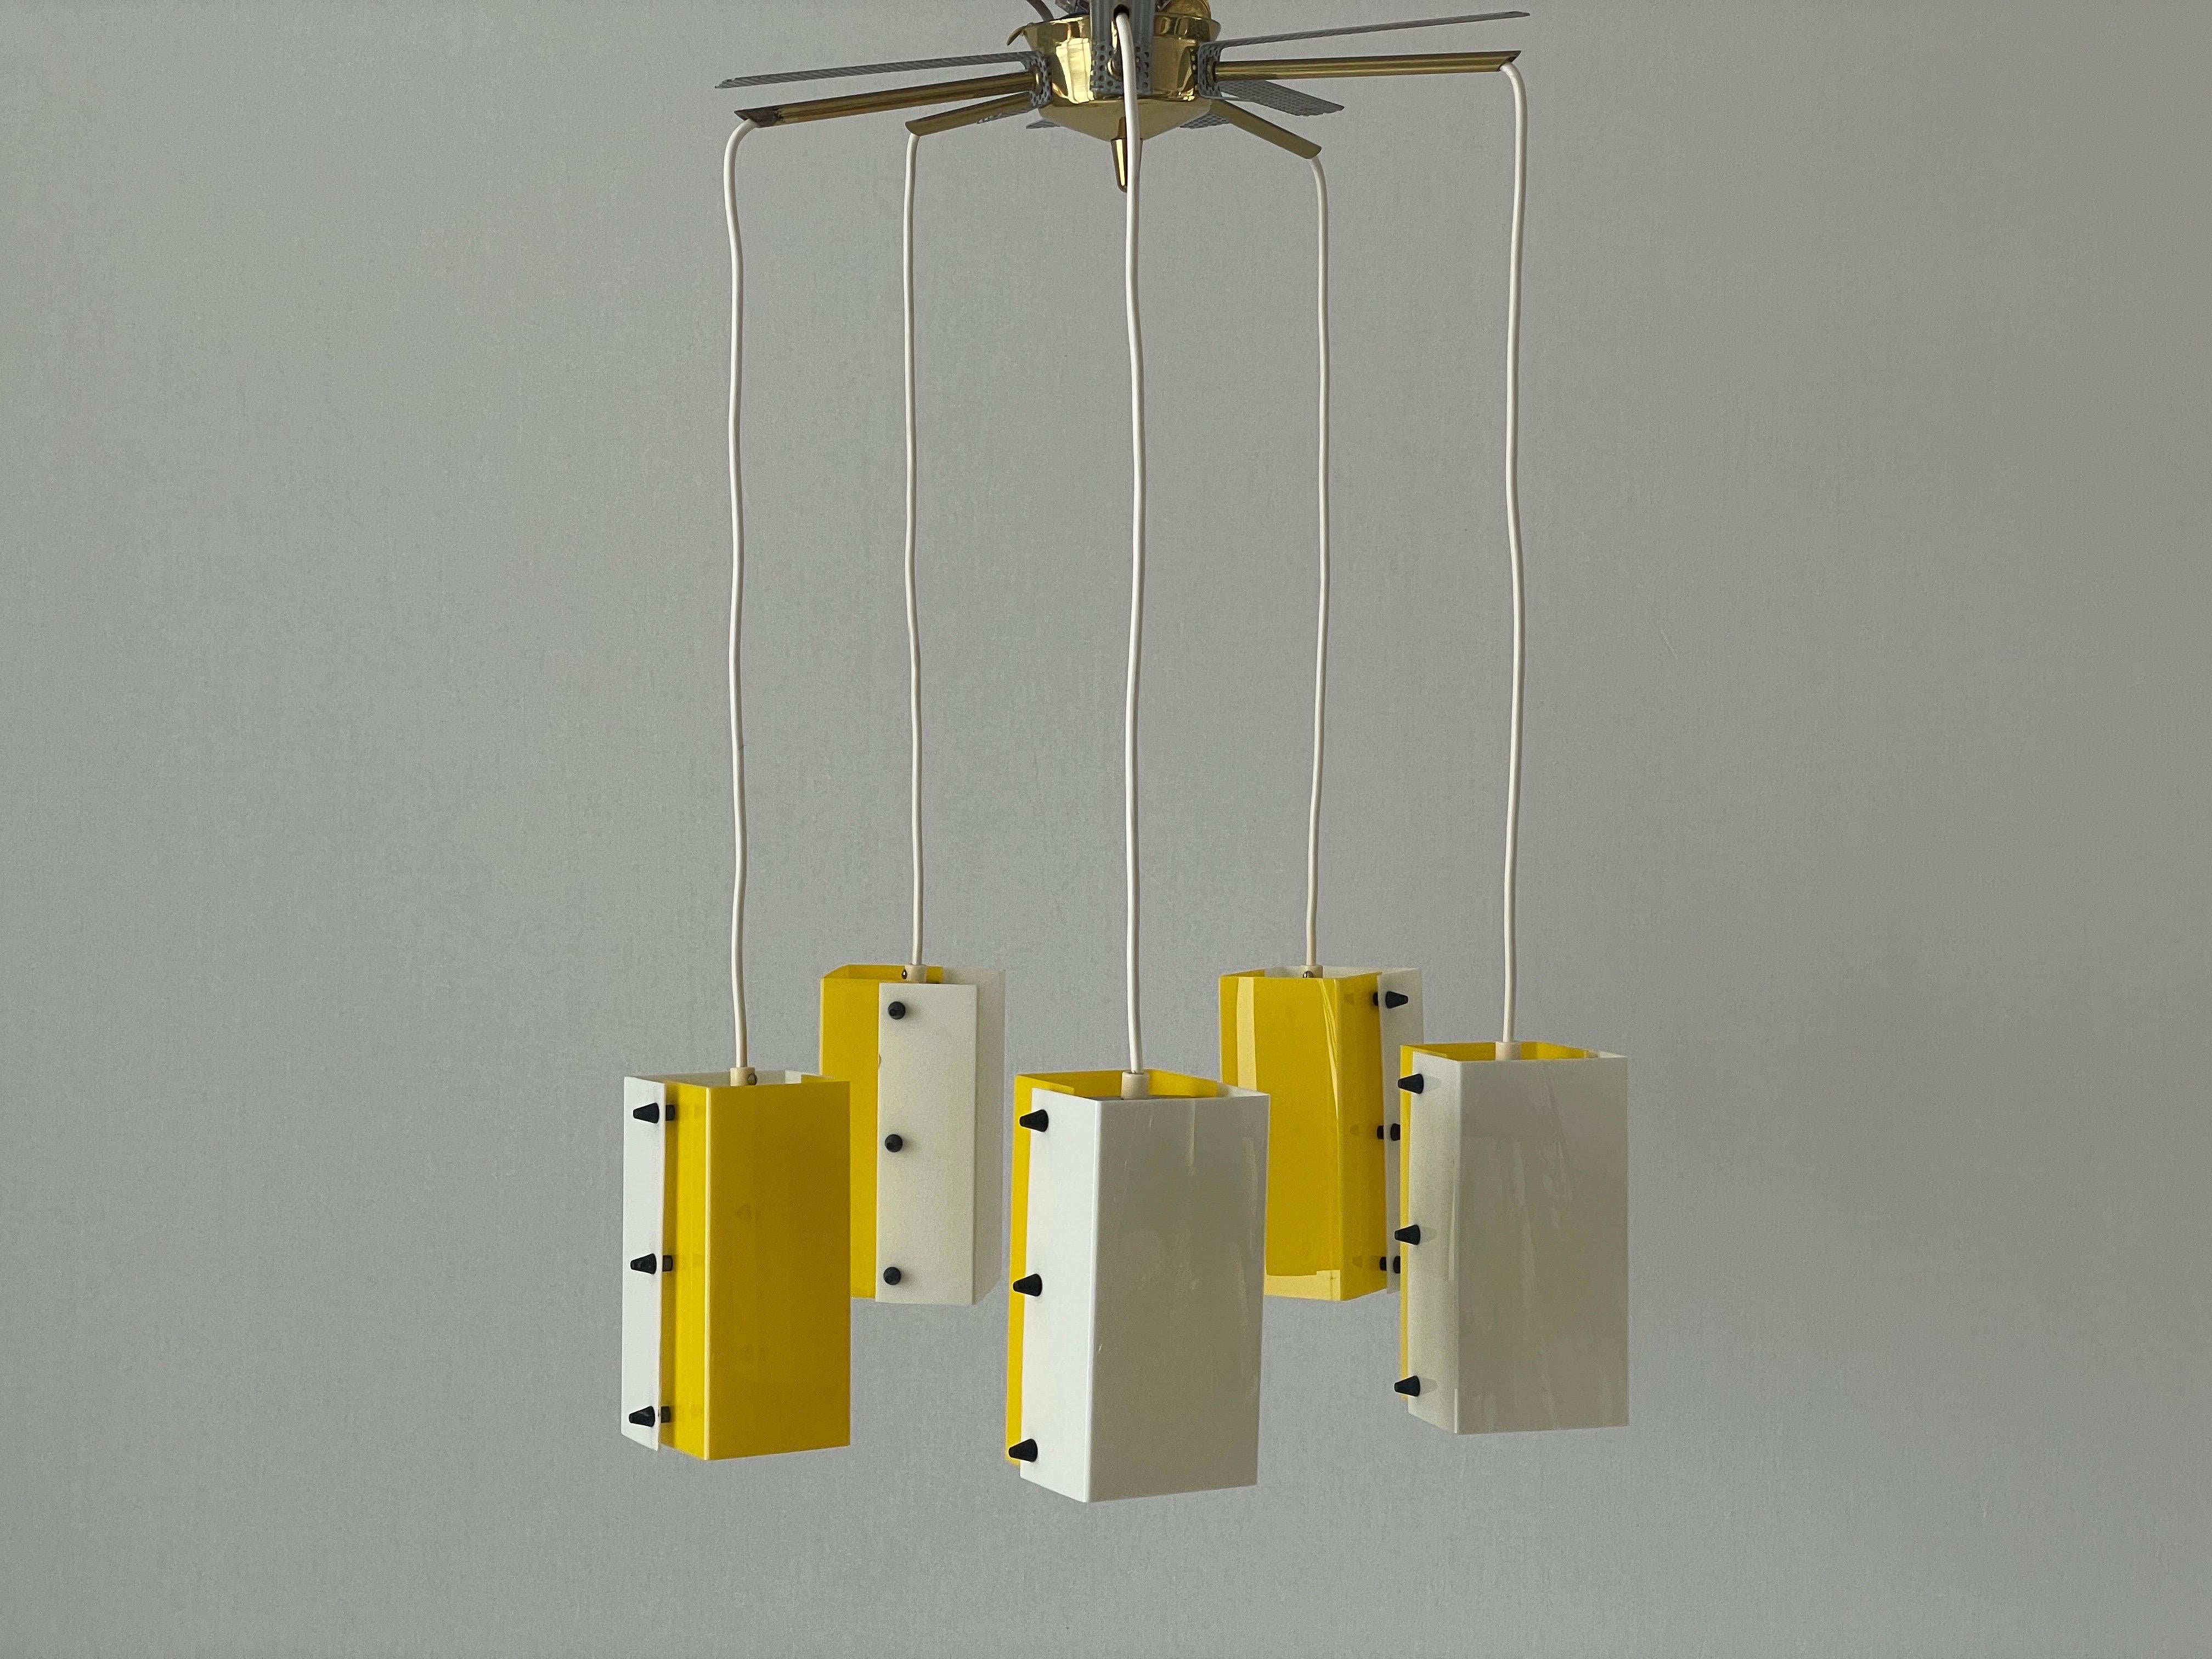 Yellow-White Plexiglass 5-shade Chandelier, 1950s, Germany
New old stok
4 available in stock.
Designed and manufactured by Schmelzer Leuchten

Lampshade is in very good vintage condition.

This lamp works with  5x E14 light bulbs. 
Wired and